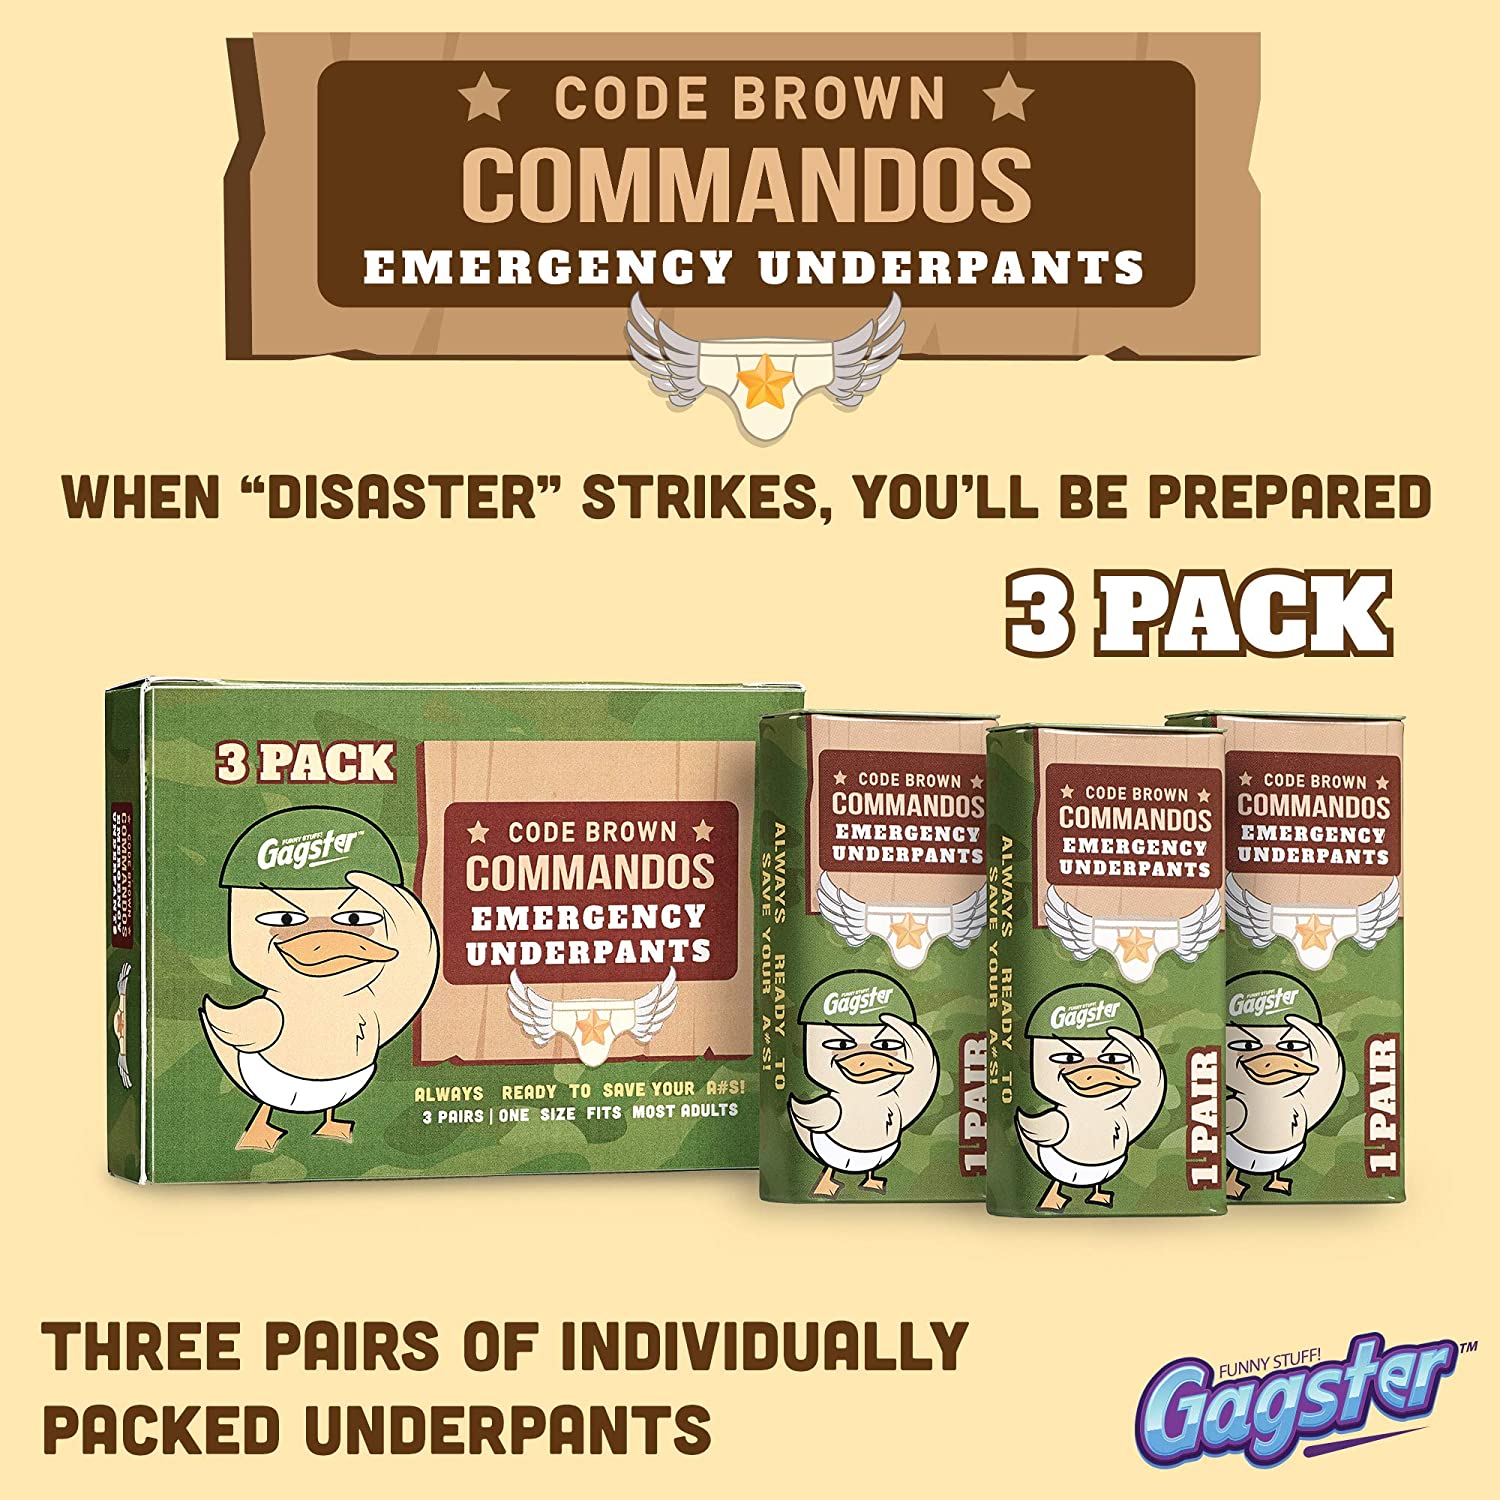 Gagster Code Brown Commandos Emergency Underpants in a Can (3 Pairs), Instant  Undies Make a Terrific White Elephant Gag Gift, Funny Party Goods